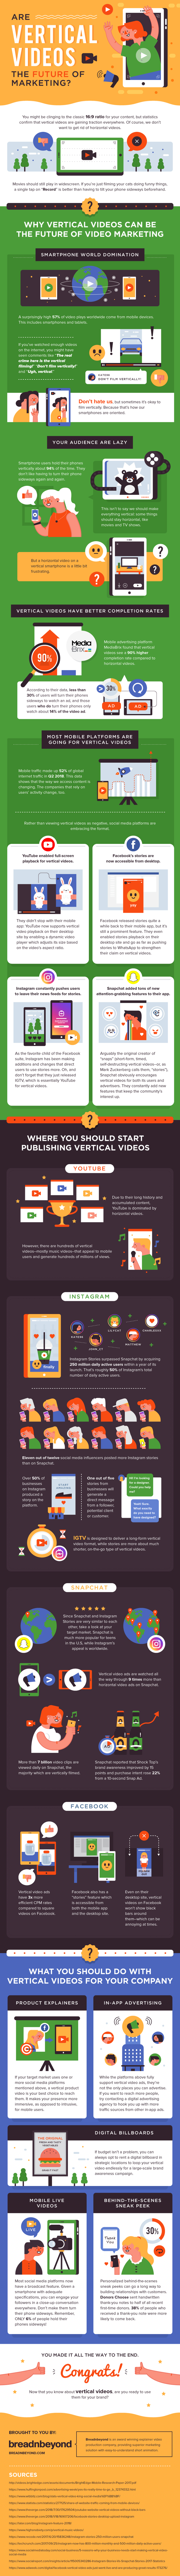 The Ultimate Guide to Vertical Videos for Social Media Marketing [INFOGRAPHIC]